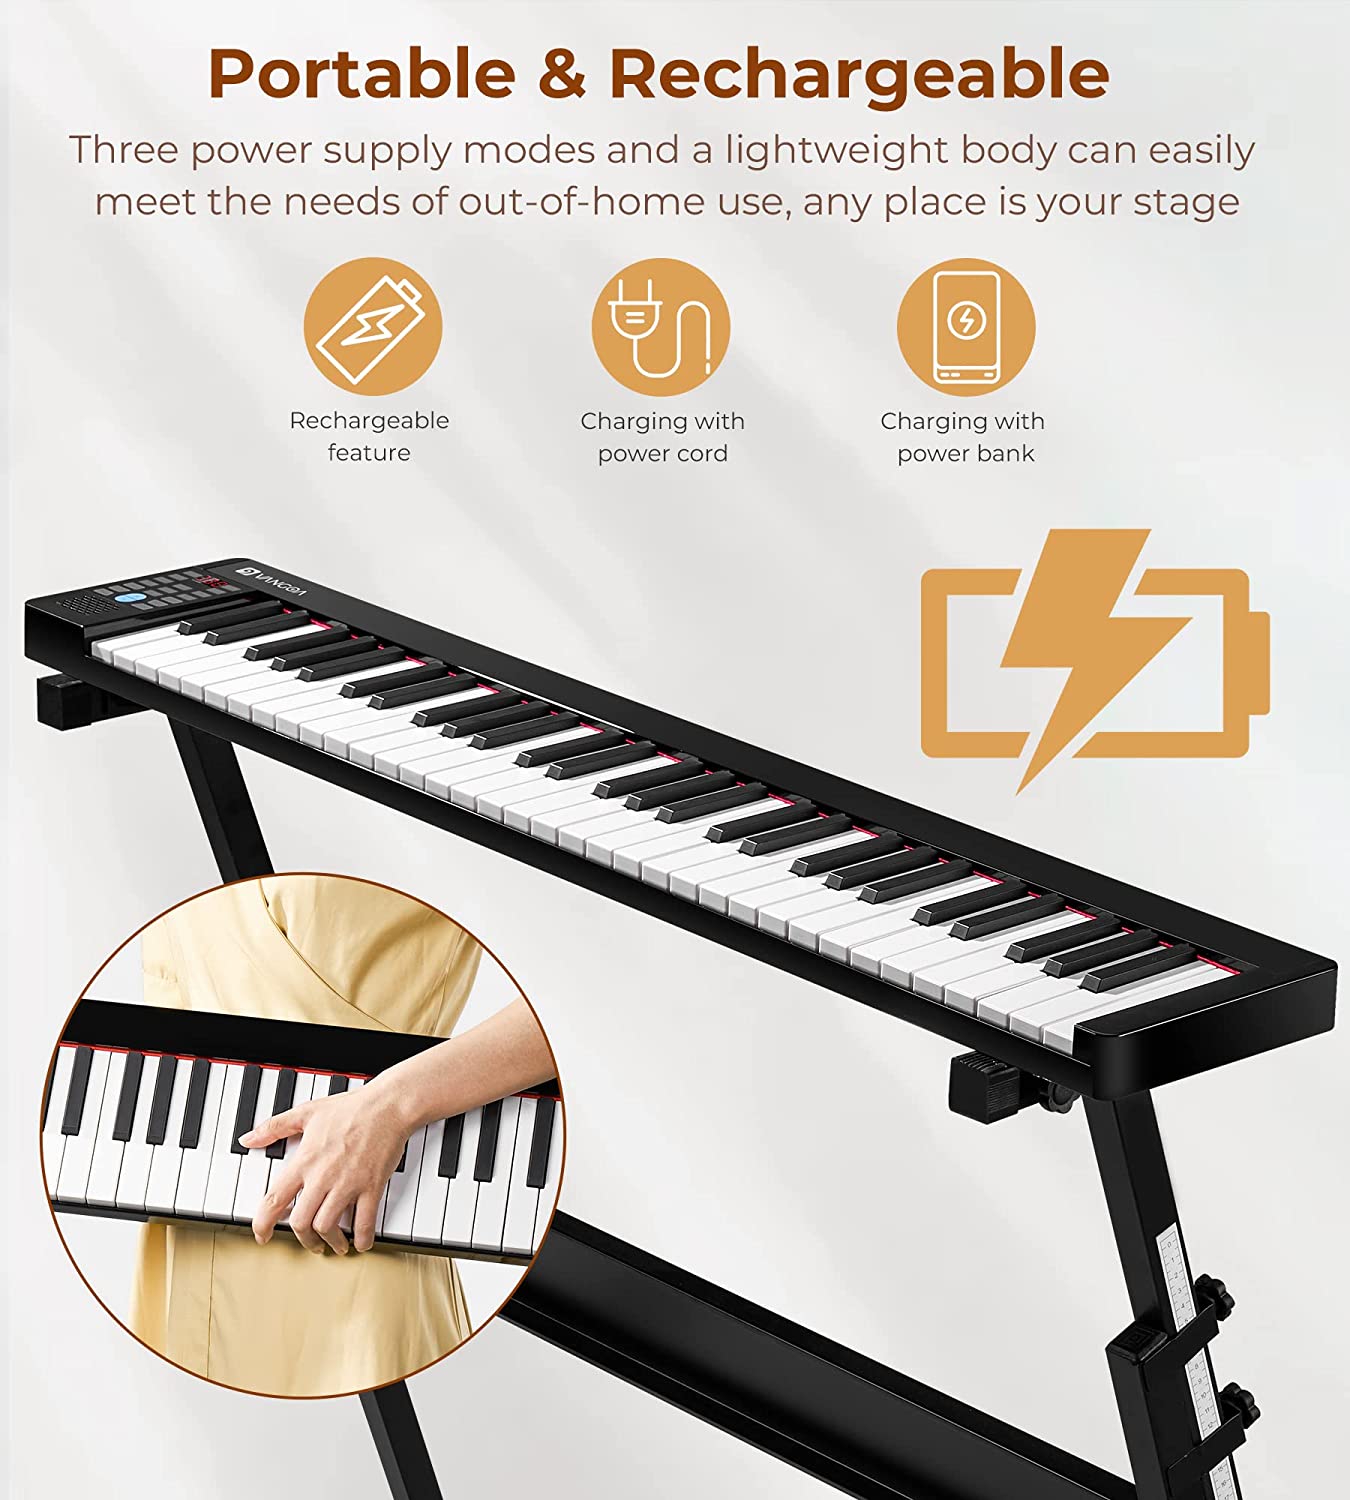 61-Key Folding Piano Keyboard with Full Size Keys and Music Stand